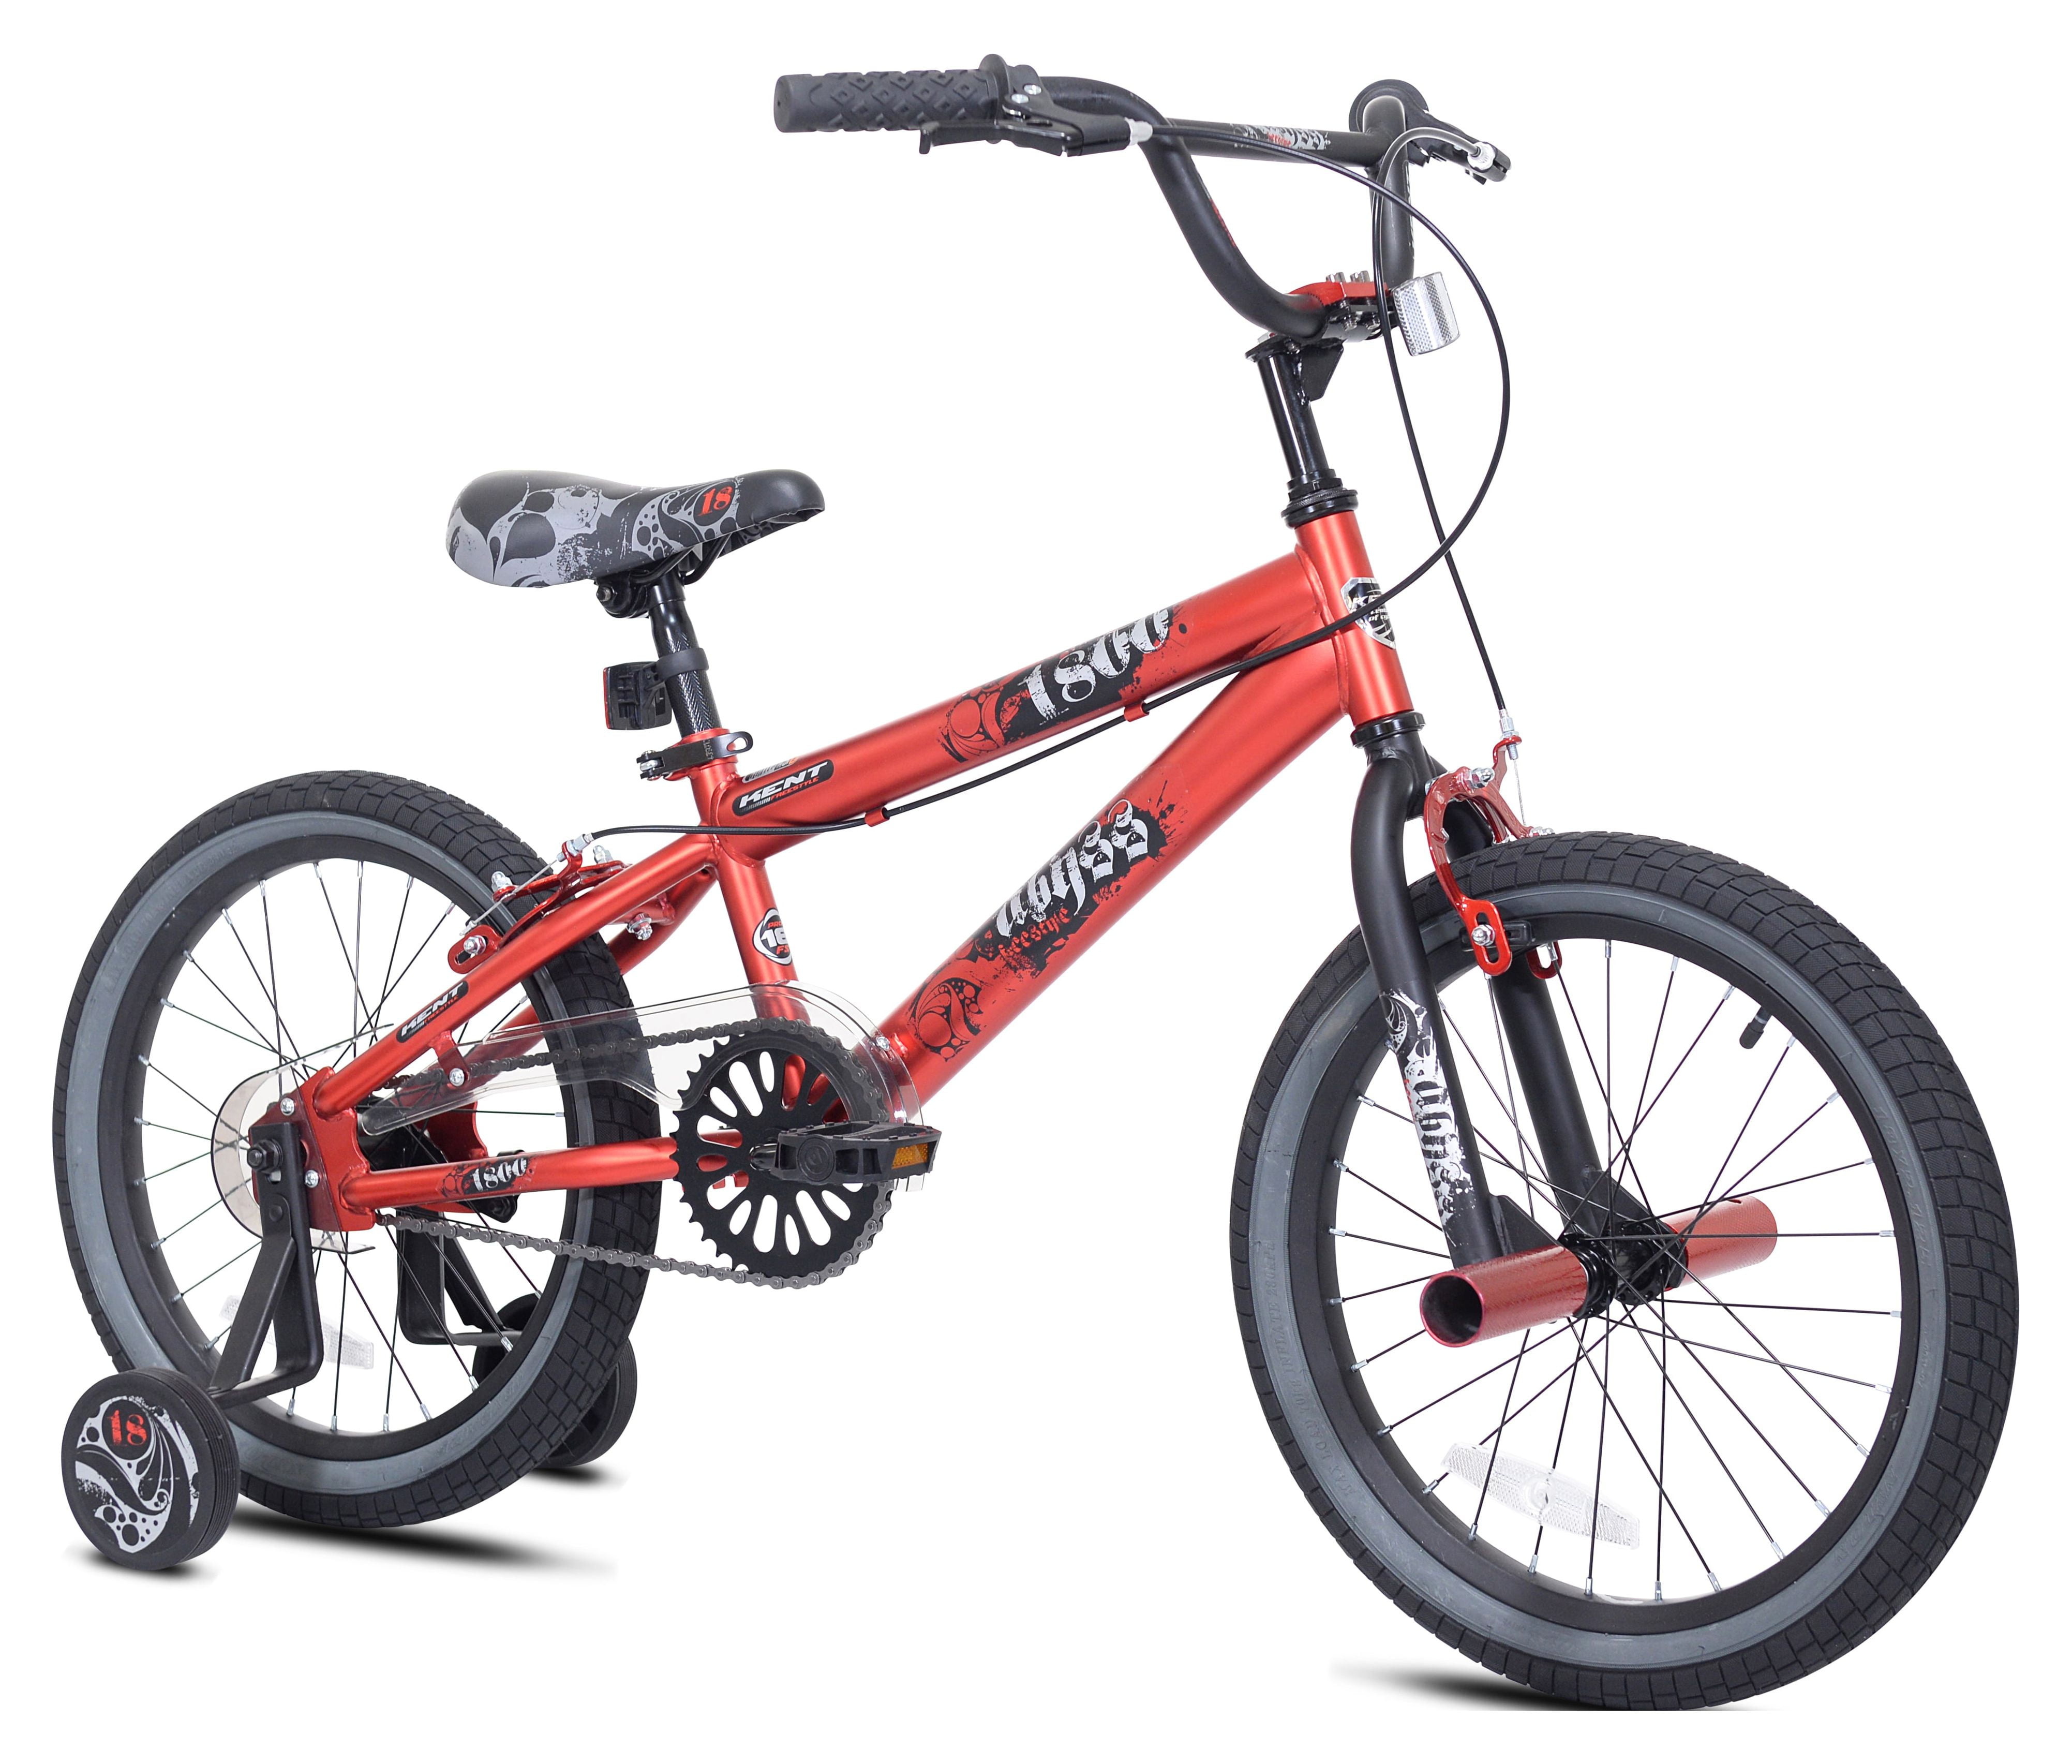 Kent Bicycle 18-inch Abyss Boy's Freestyle BMX Bicycle, Blue